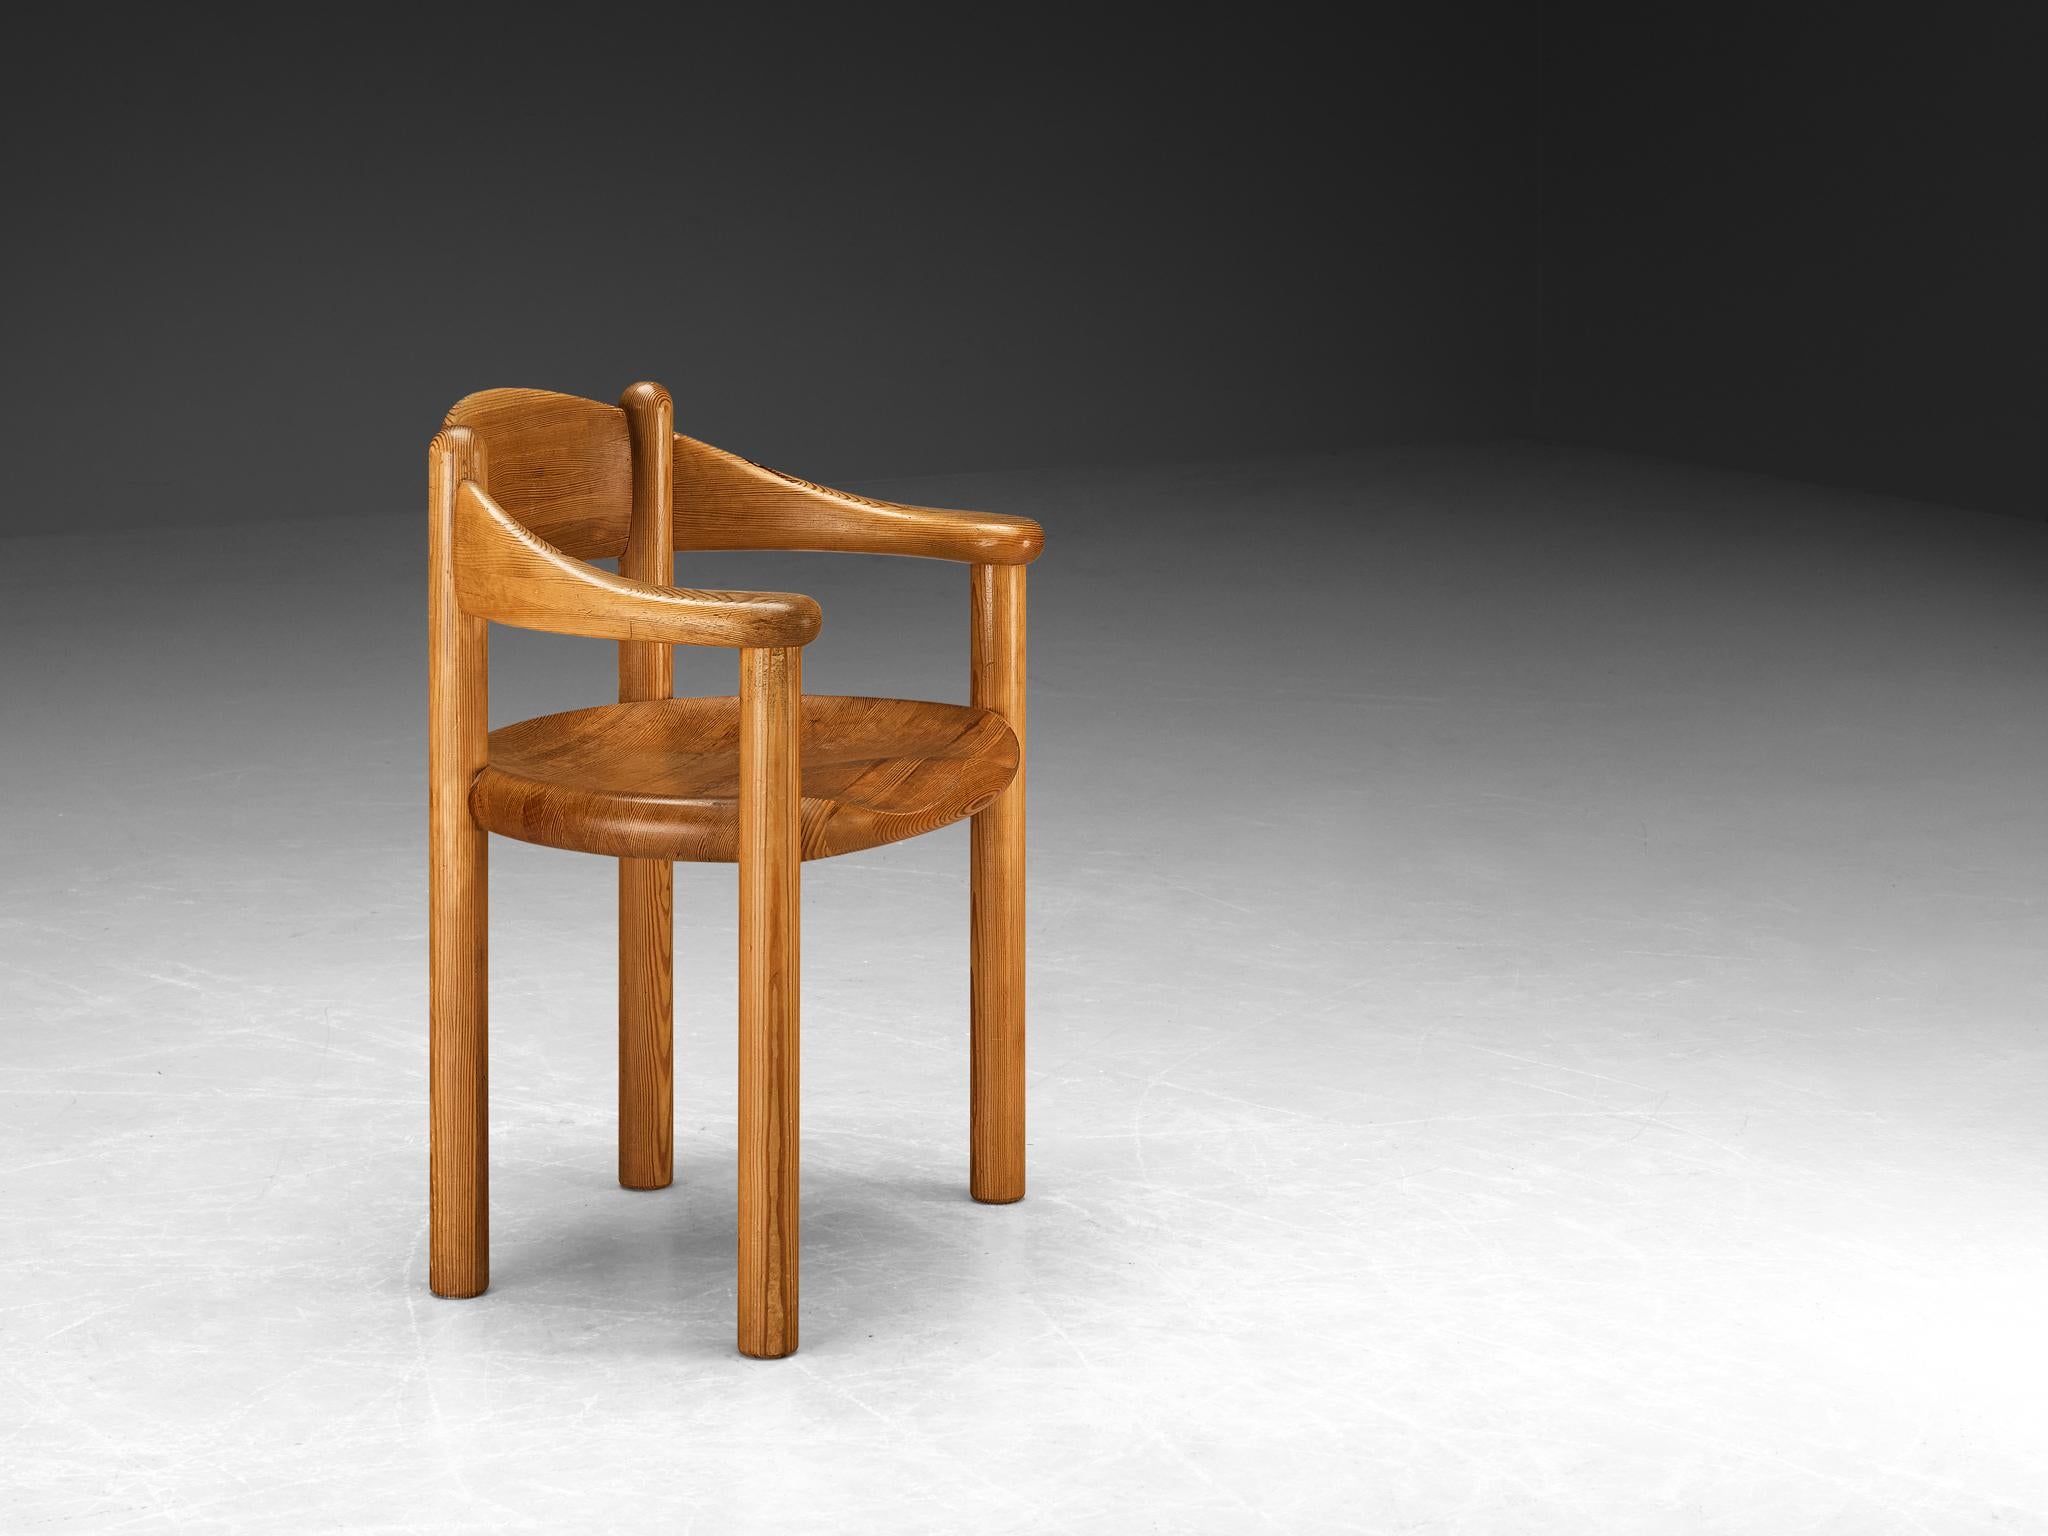 Rainer Daumiller, armchair, solid pine, Denmark, 1970s

Beautiful organic and natural dining chair in solid pine. A simplistic design with round detailing and full attention for the natural expression and grain of the wood. The slender curved